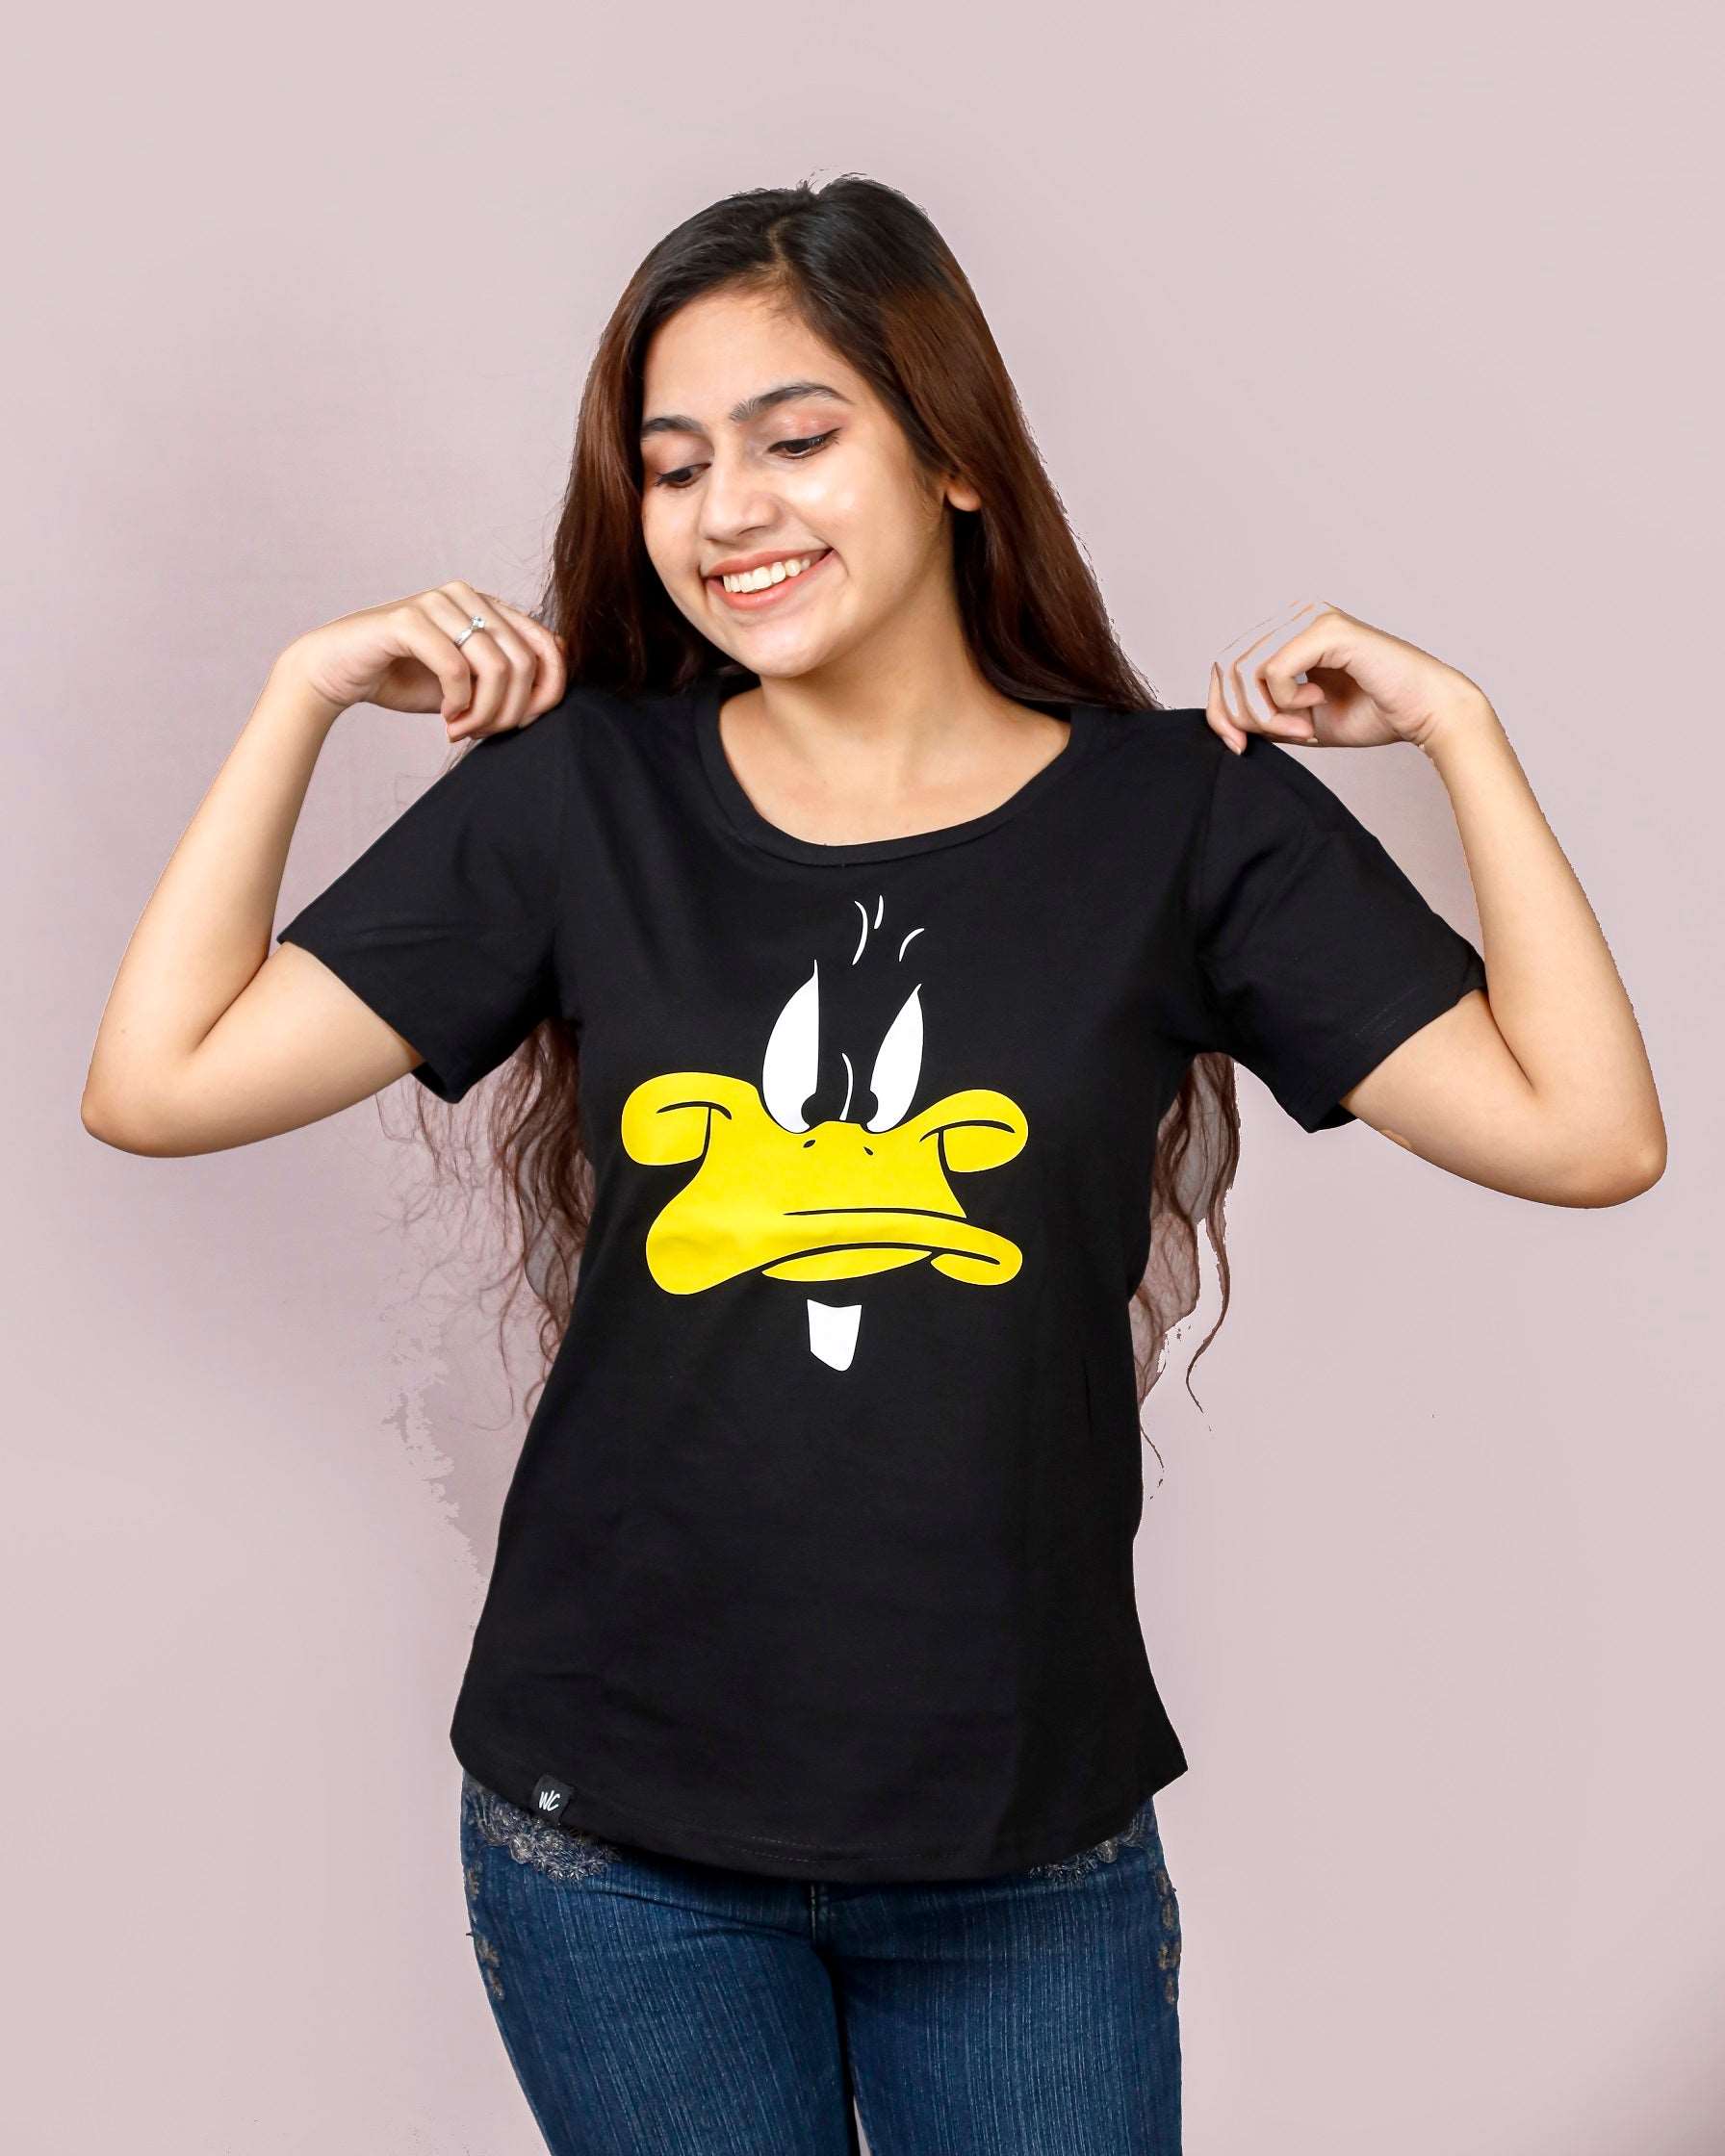 women standing and wearing a black daffy duck printed womens tshirt